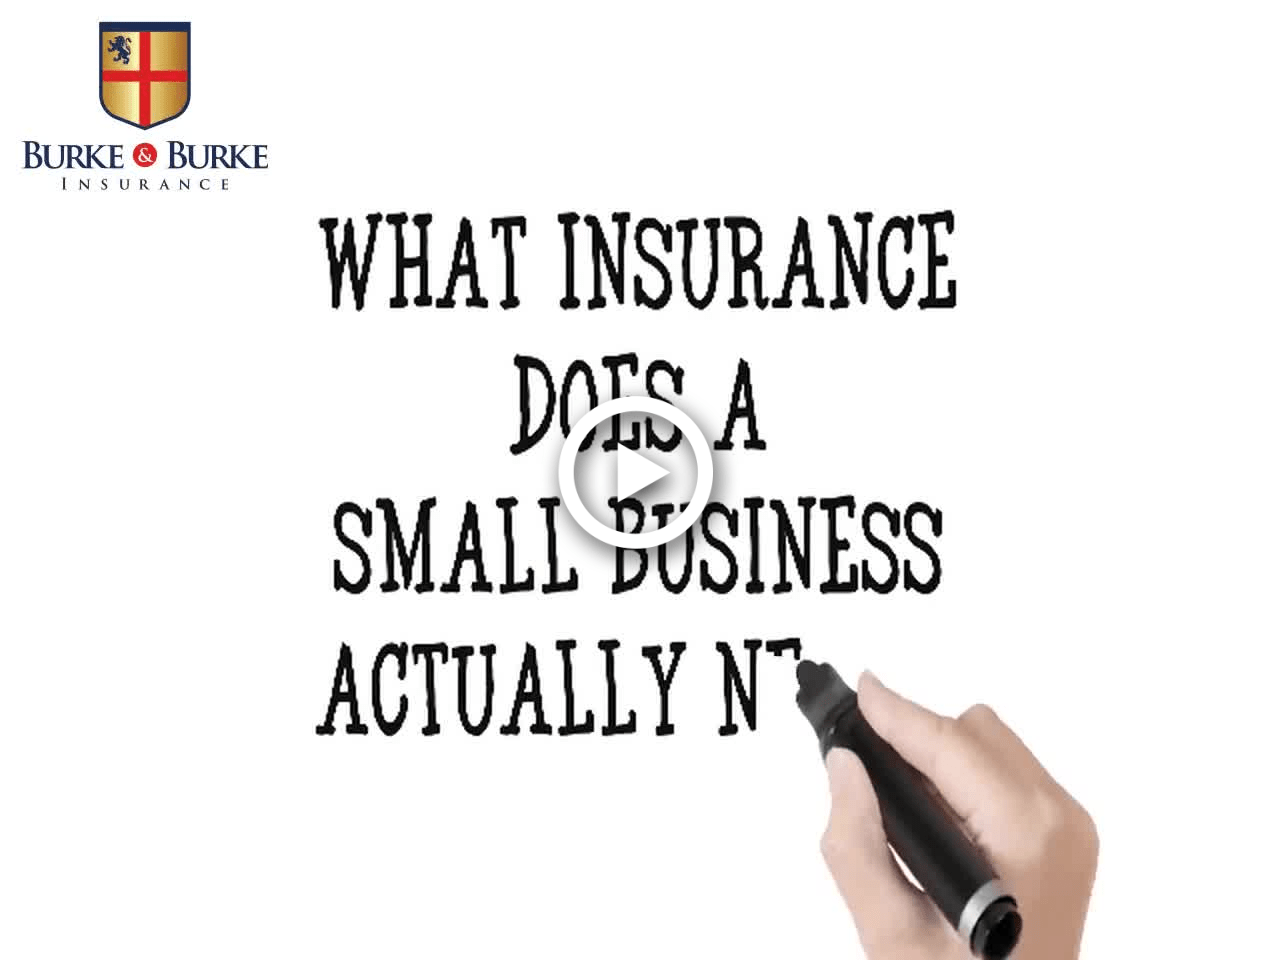 Business Insurance Bad Luck Cases 1 and 2 (Annandale, VA)